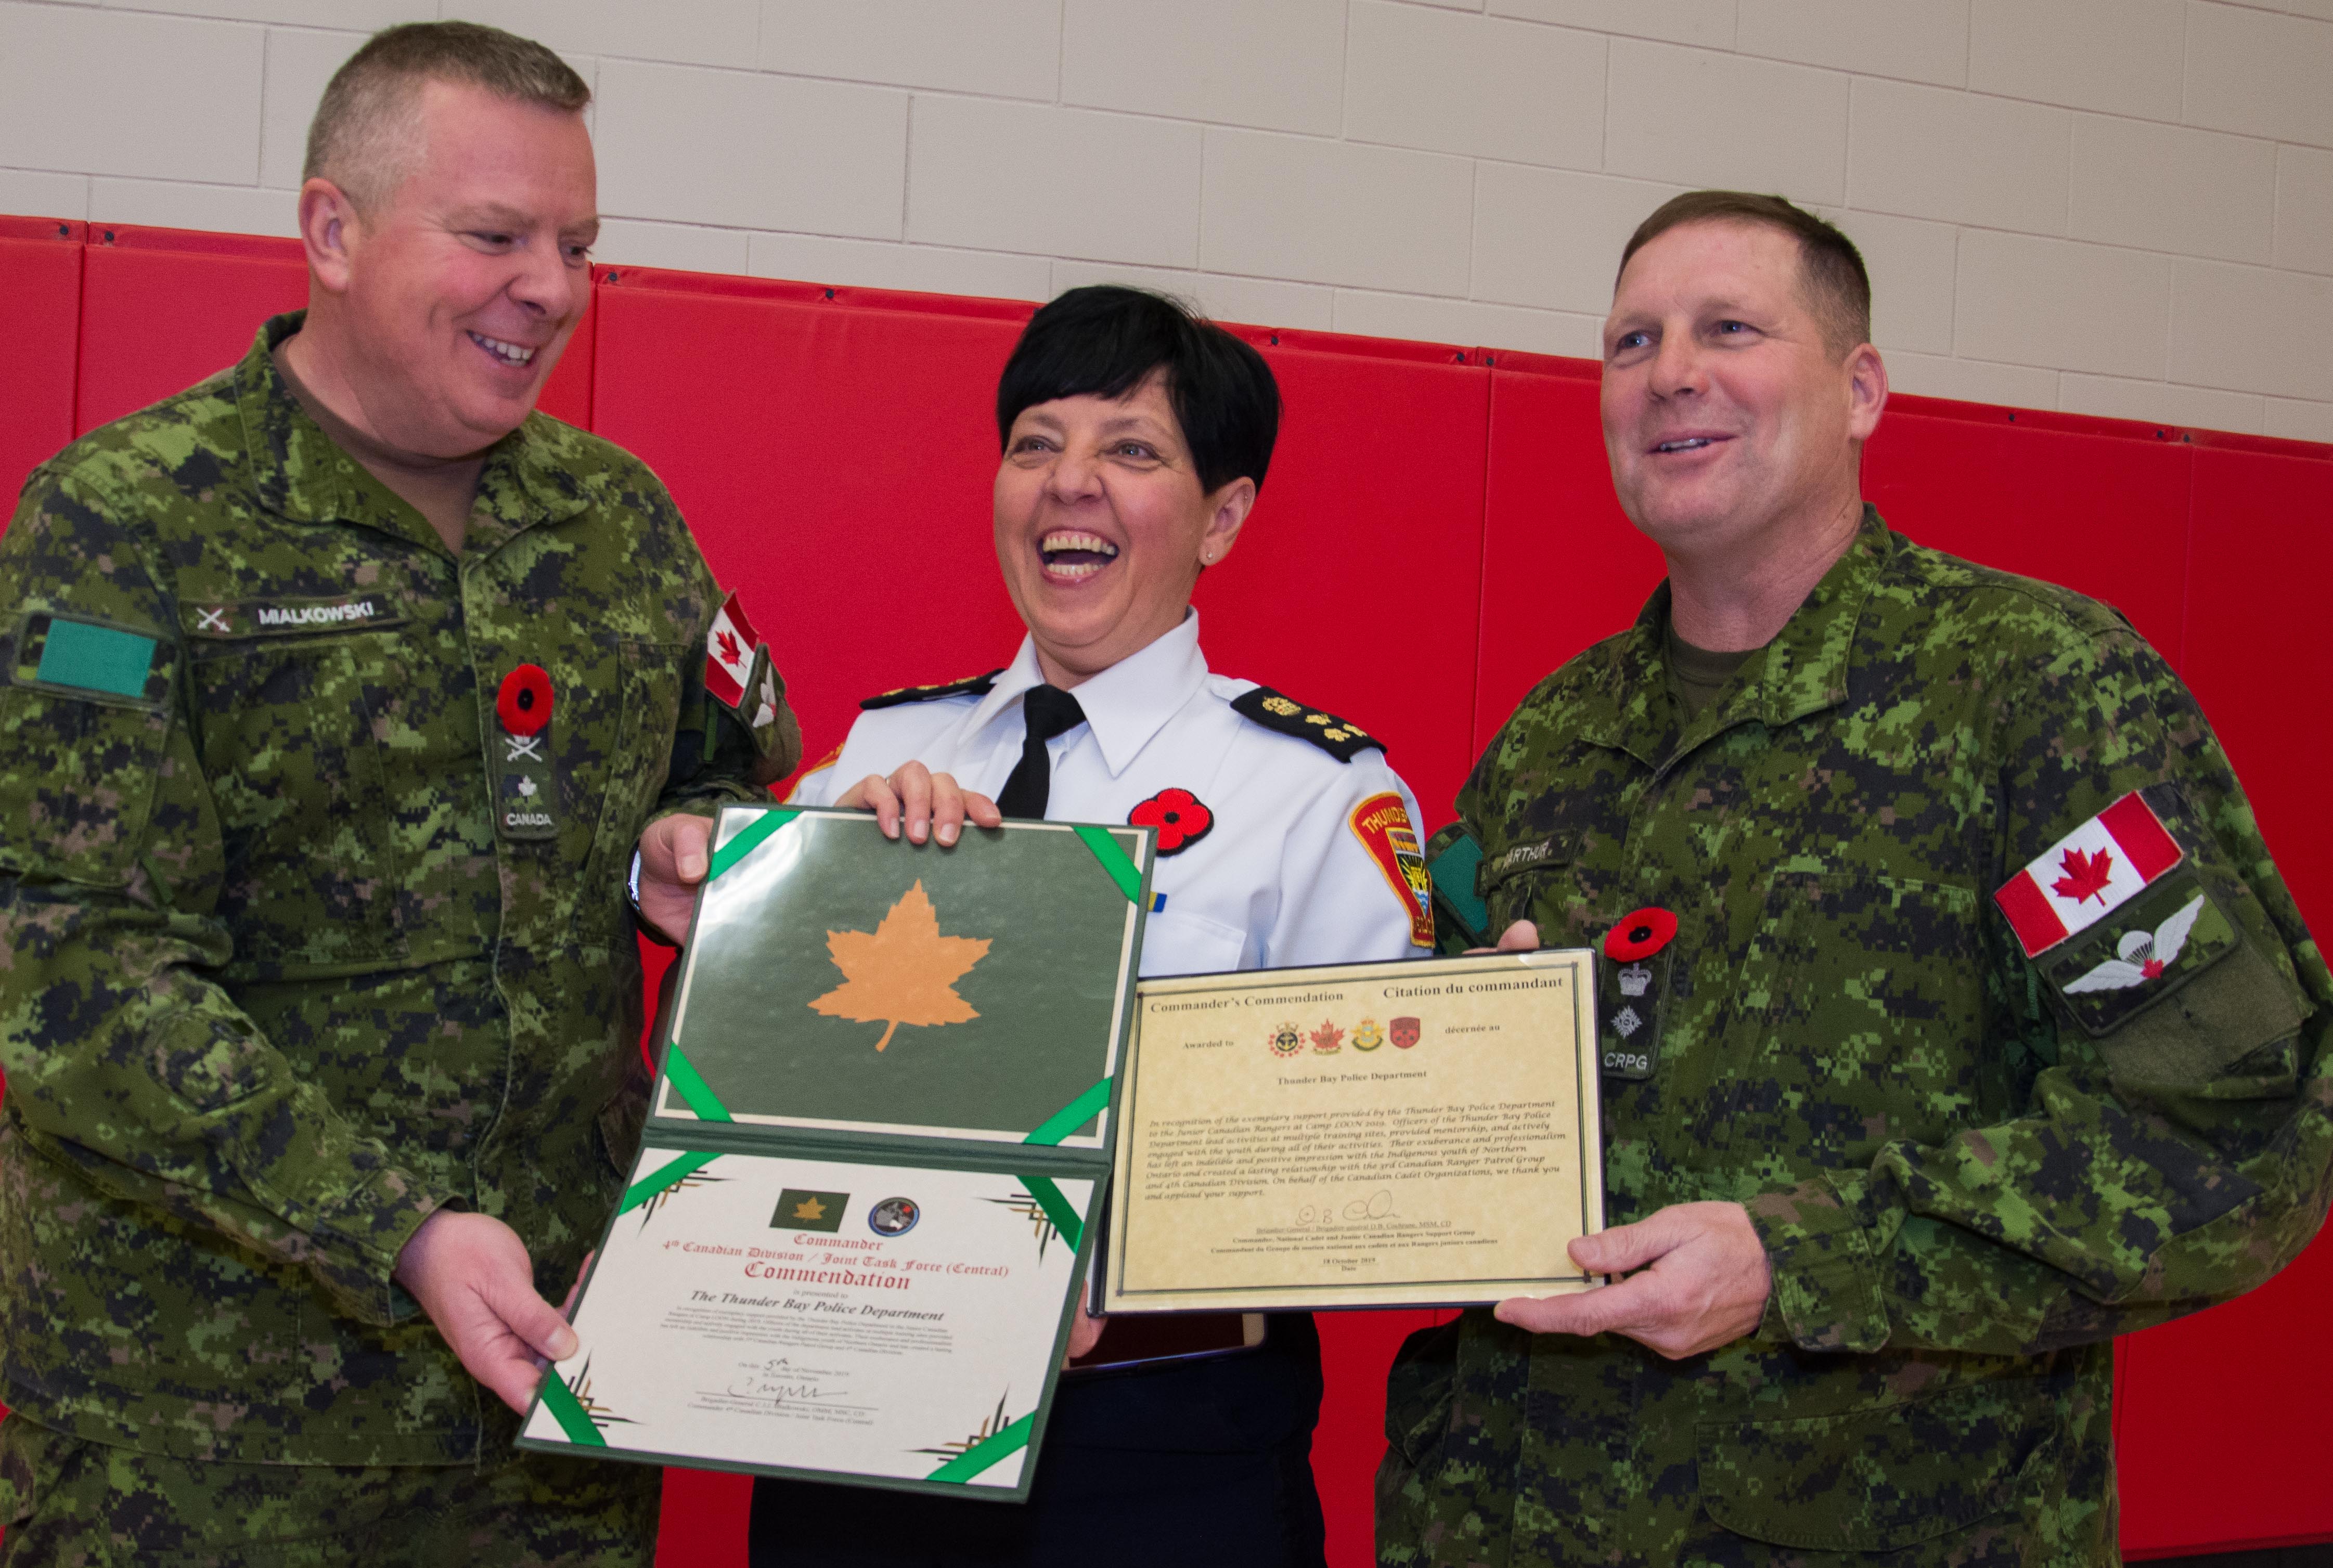 TBPS Camp Loon efforts honoured at special ceremony